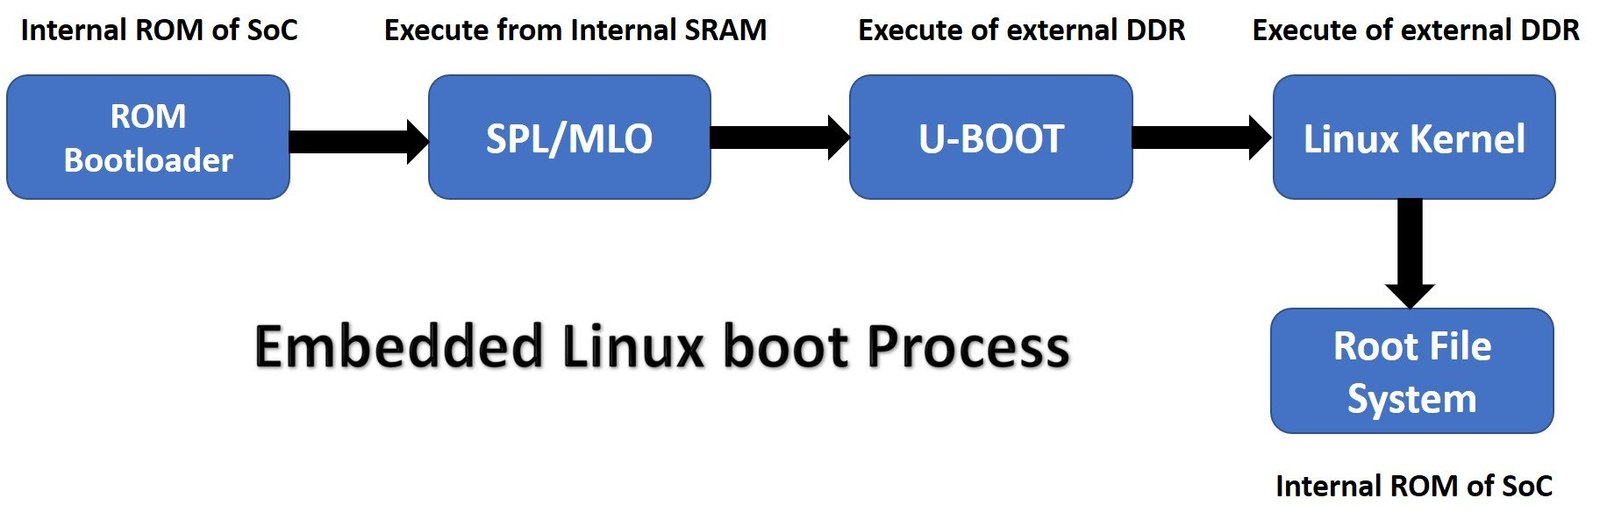 embedded linux boot process flow